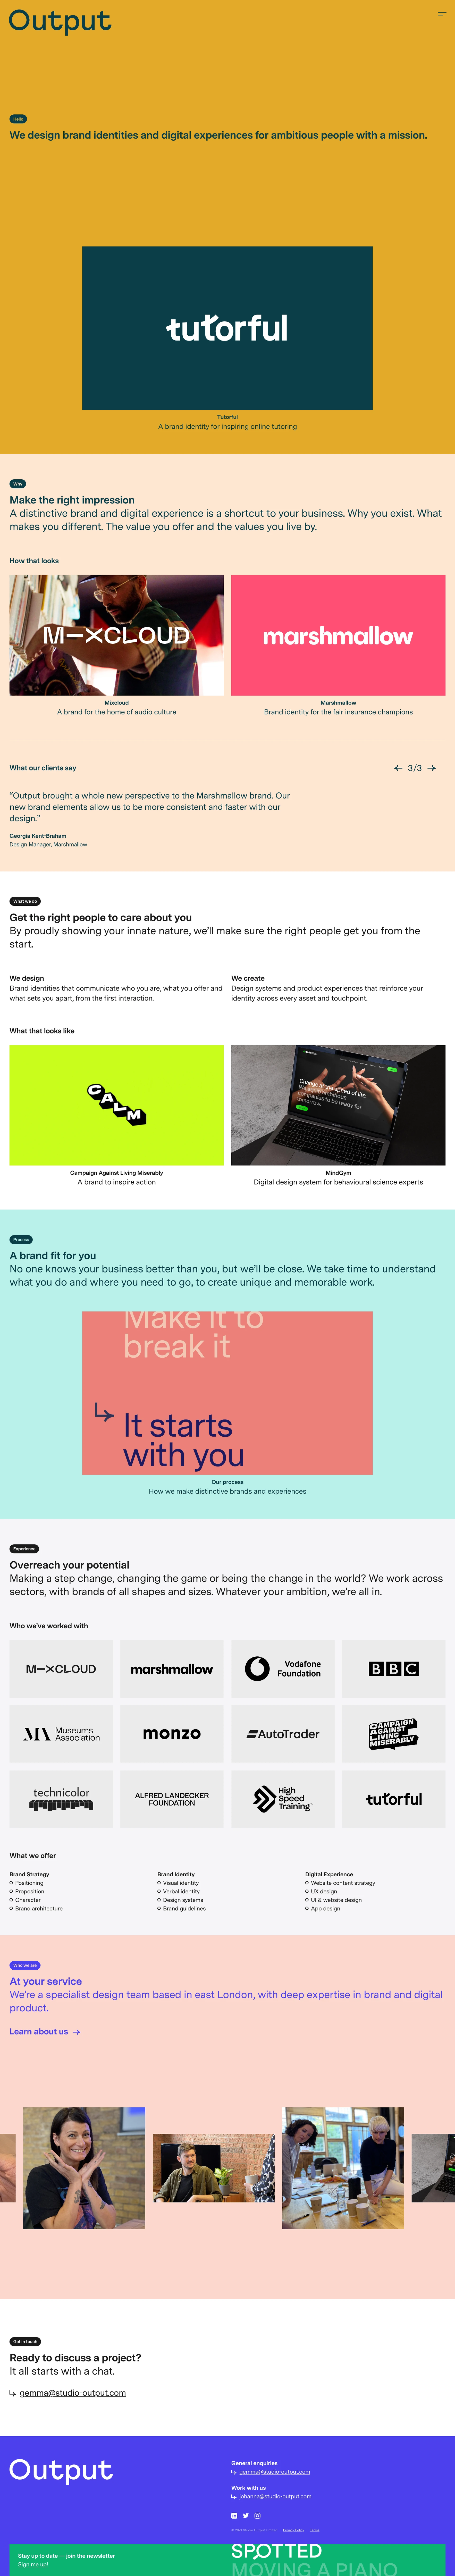 Output Landing Page Example: Output is a design agency making brand identities and digital experiences for ambitious people with a mission.